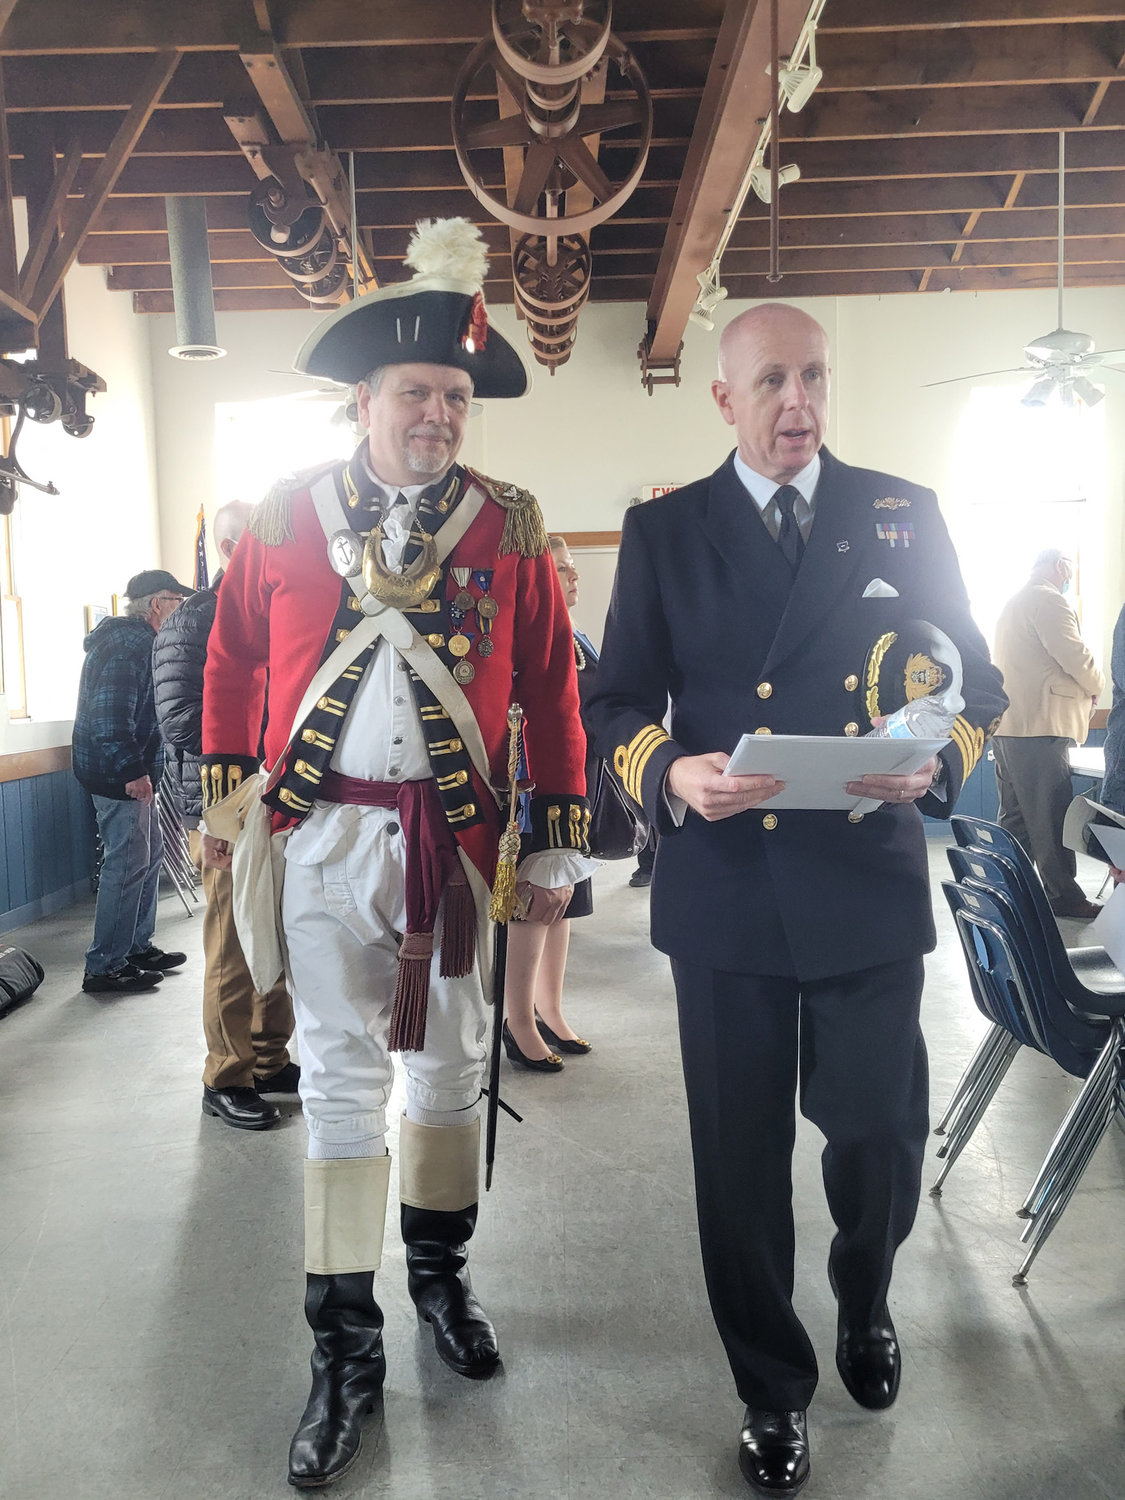 TOP BRASS: Johnston resident Col. Ron Barnes, Commander of the Pawtuxet Rangers, walks with British Naval Commander Steven White, of Her Majesty’s Royal Navy.